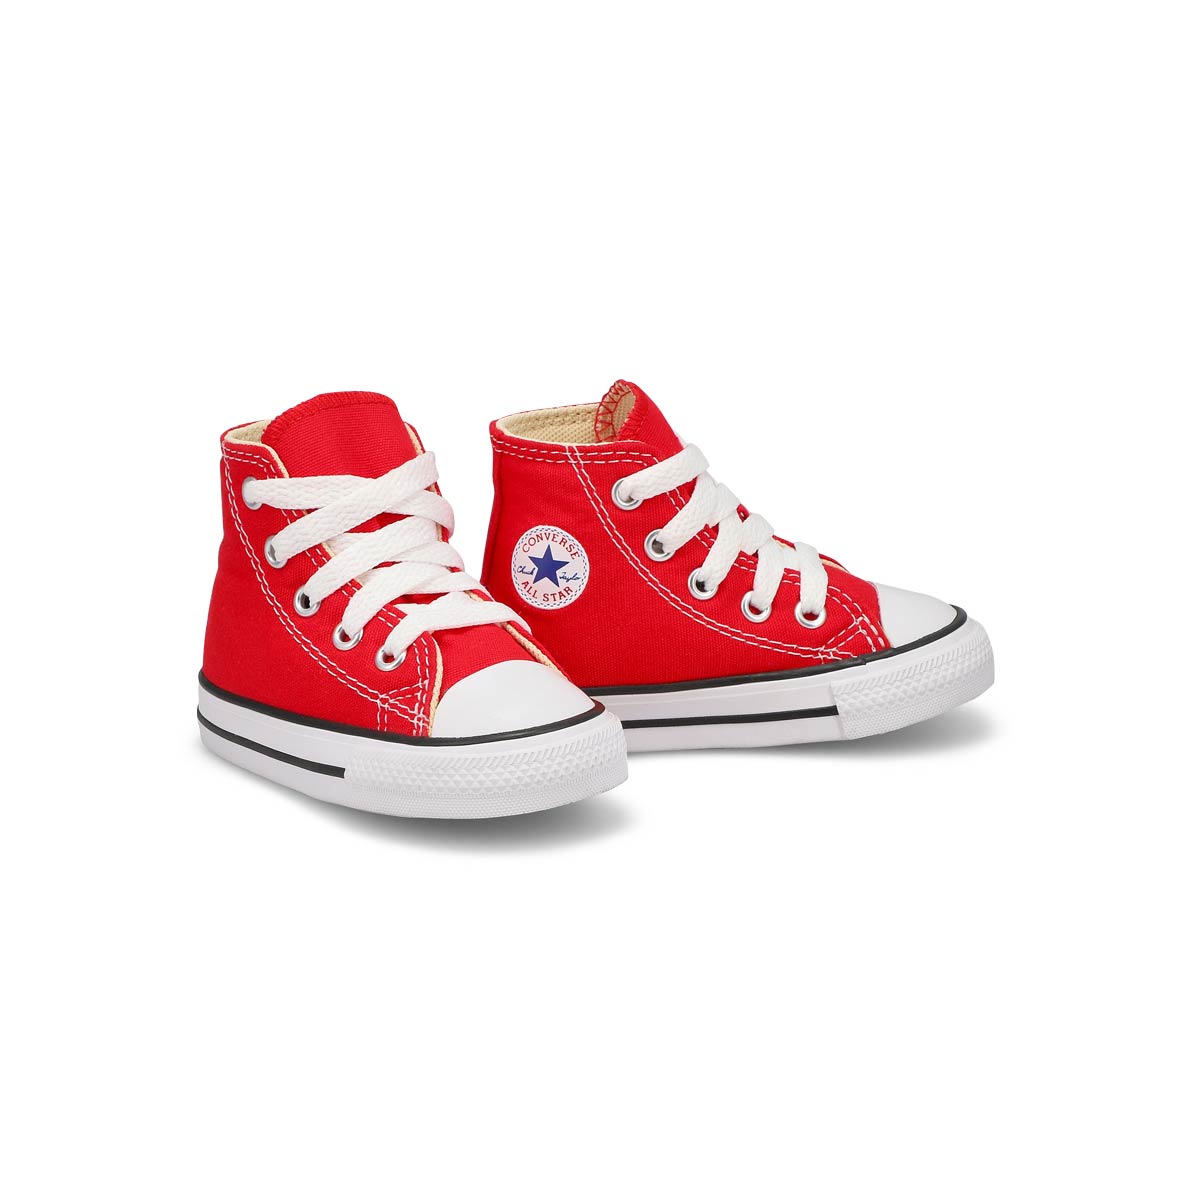 Infants' Chuck Taylor All Star Hi Top Sneaker - Red